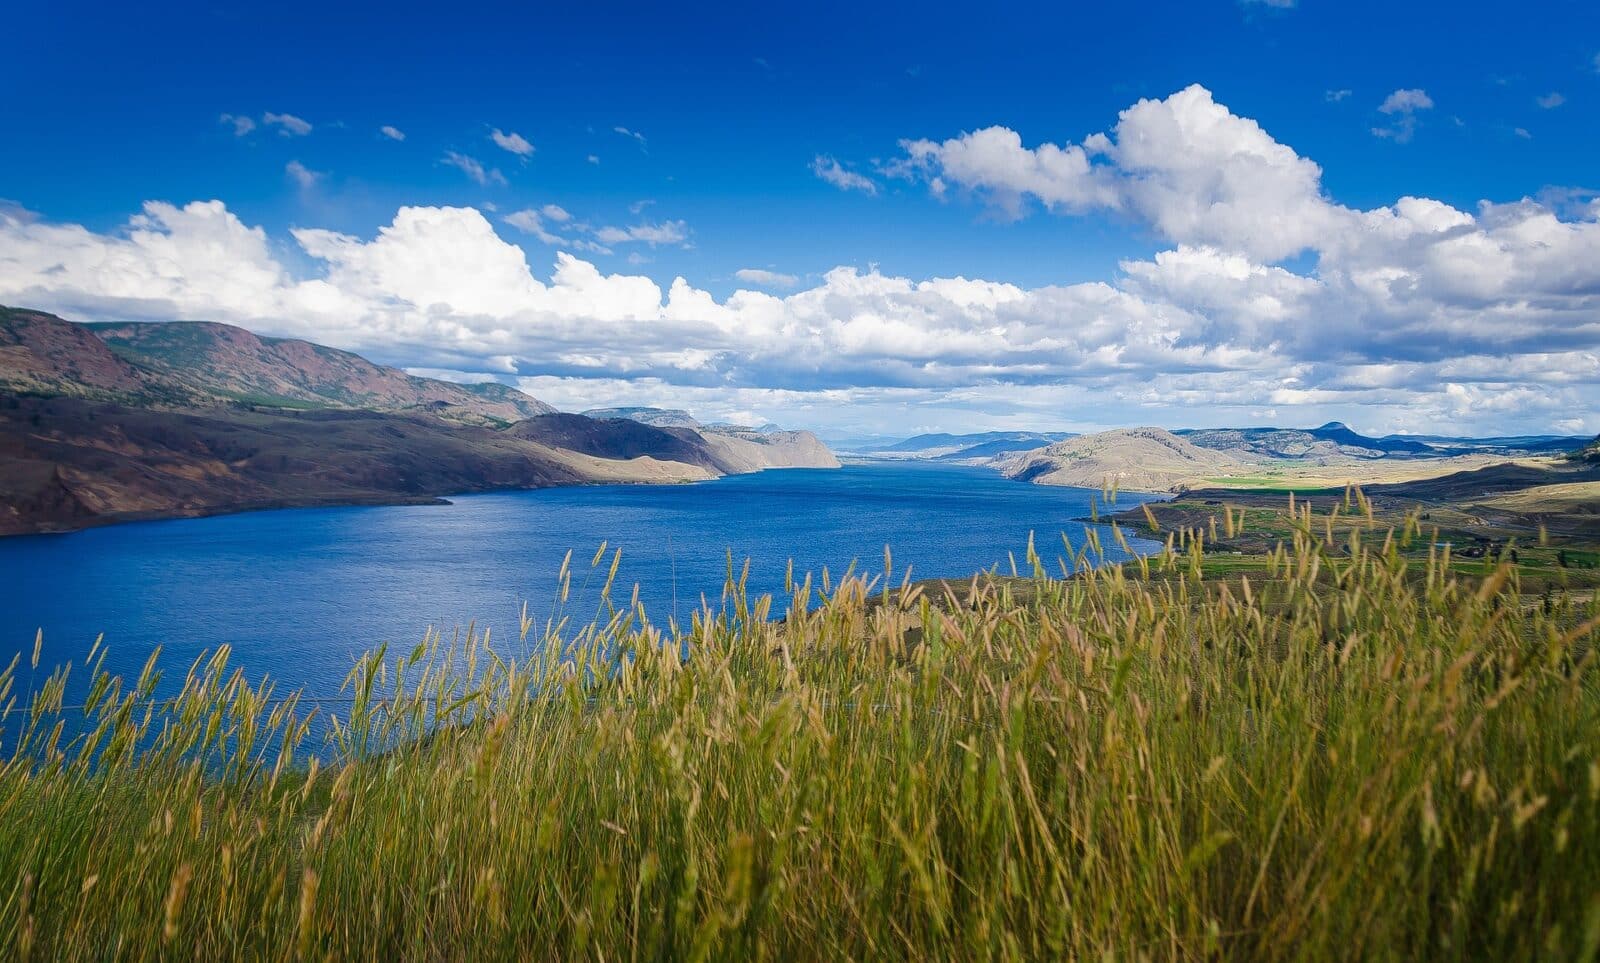 landscape shot of grass, lake and mountains